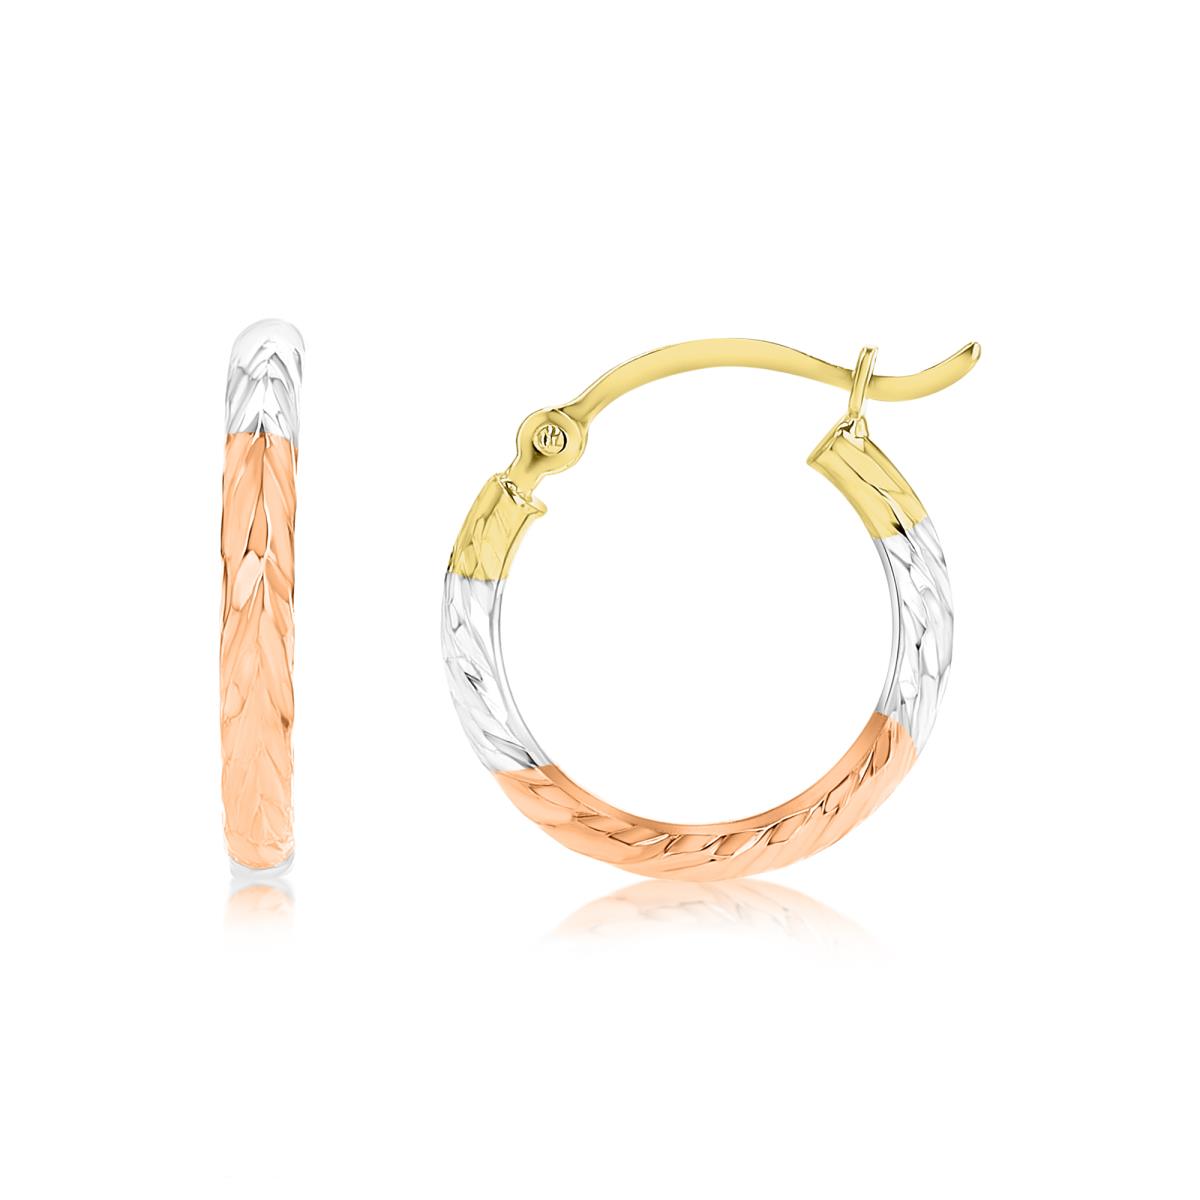 14K Gold Tricolor 2x15mm (0.60") Twisted DC Hoop Earring